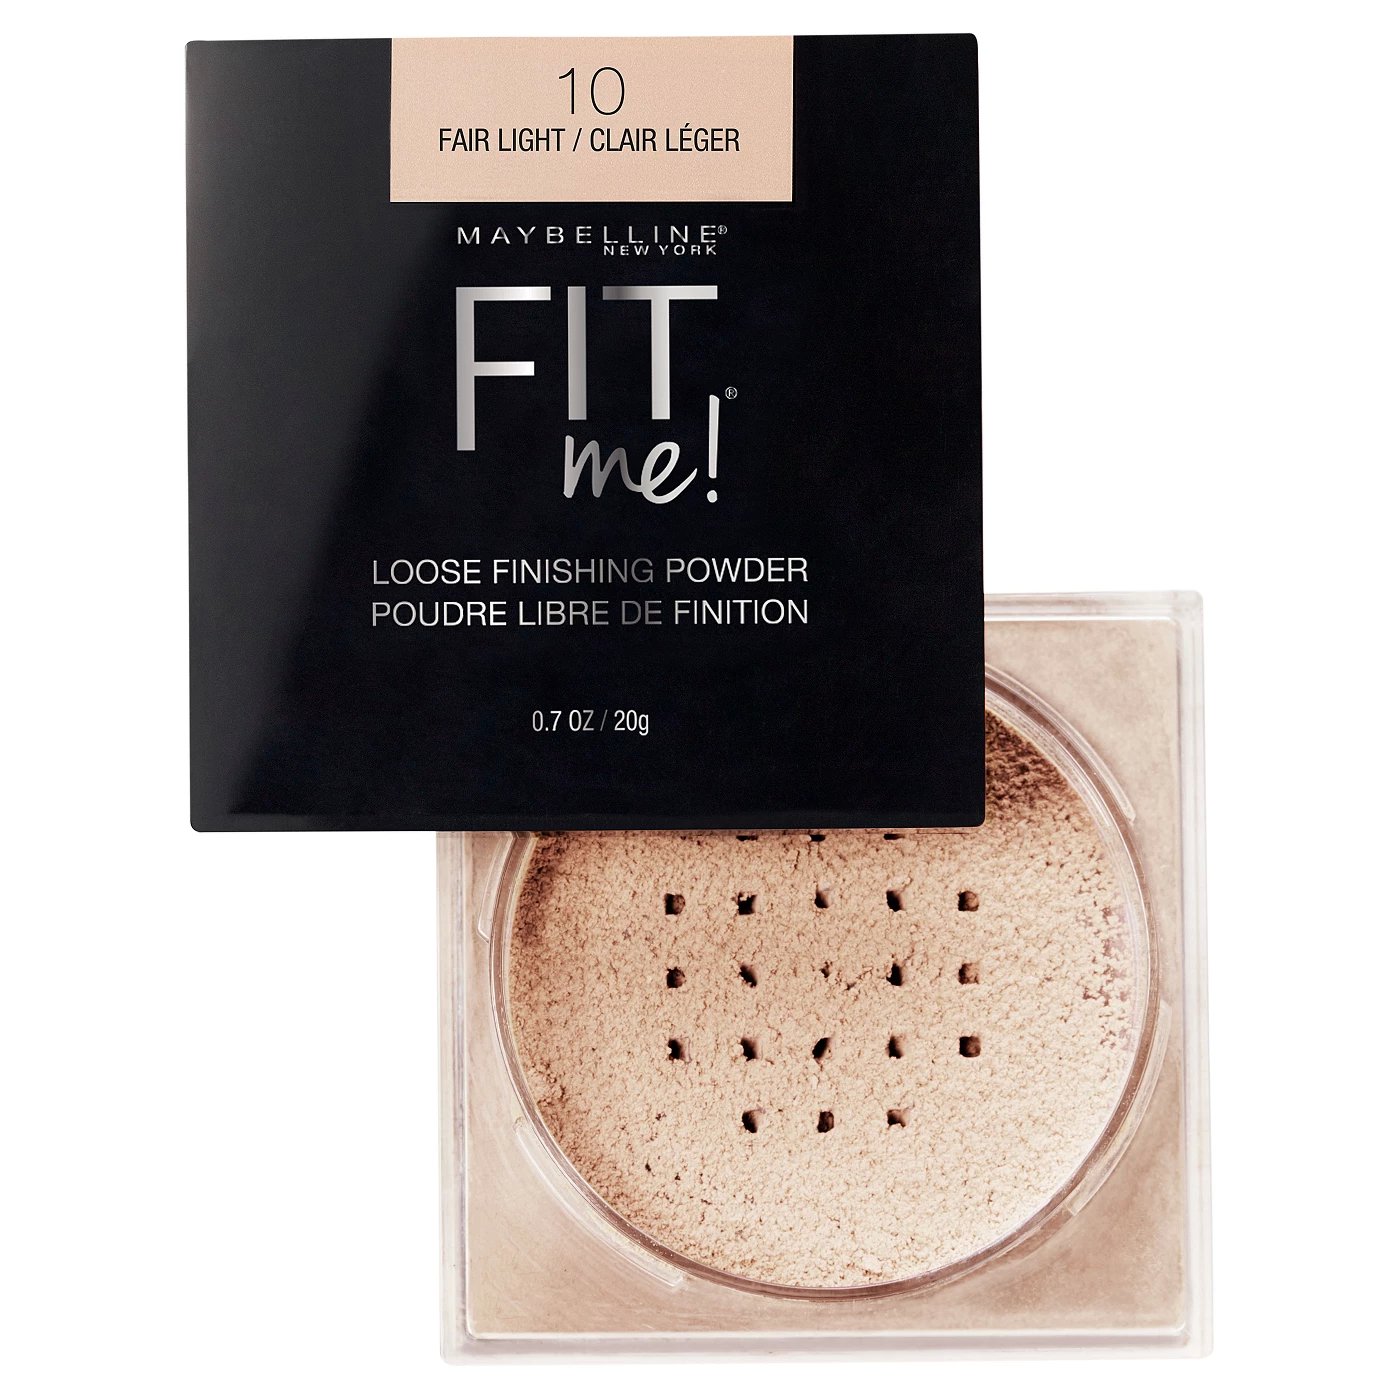 MAYBELLINE Fit Me Loose Finishing Powder - Fair Light #10